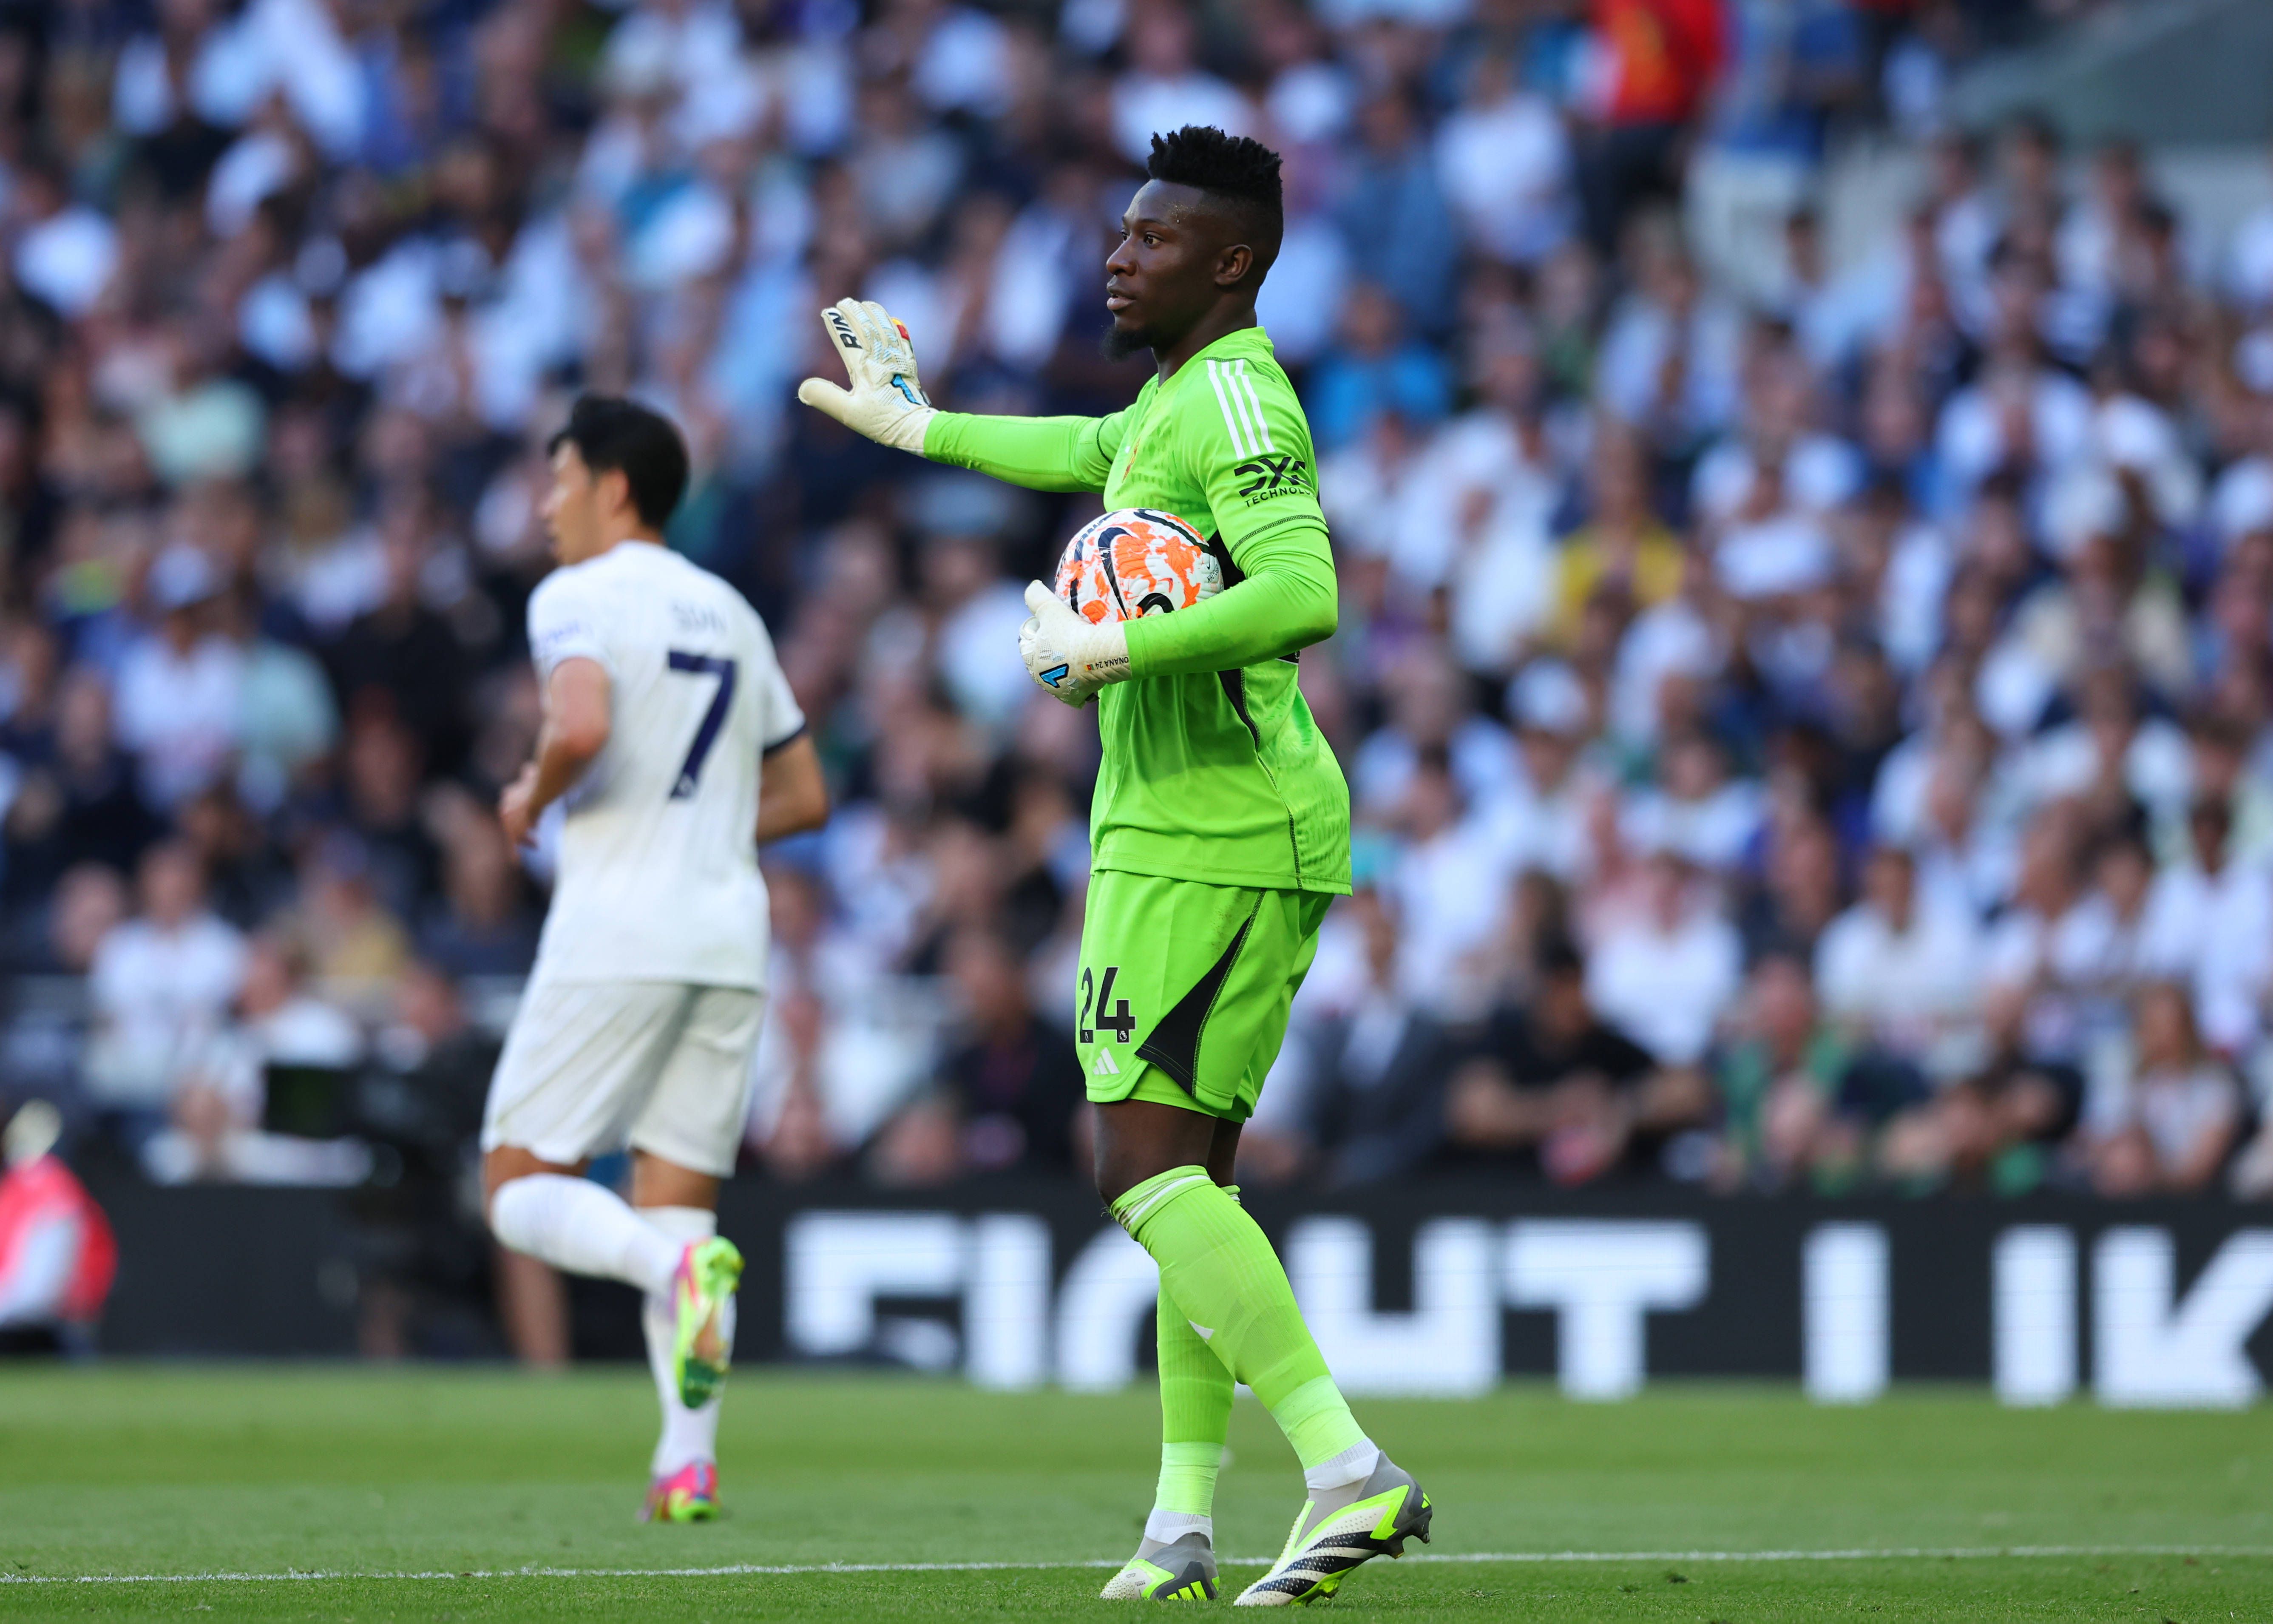 Goalkeeper Andre Onana in action for Man United | Photo Credit: Imago